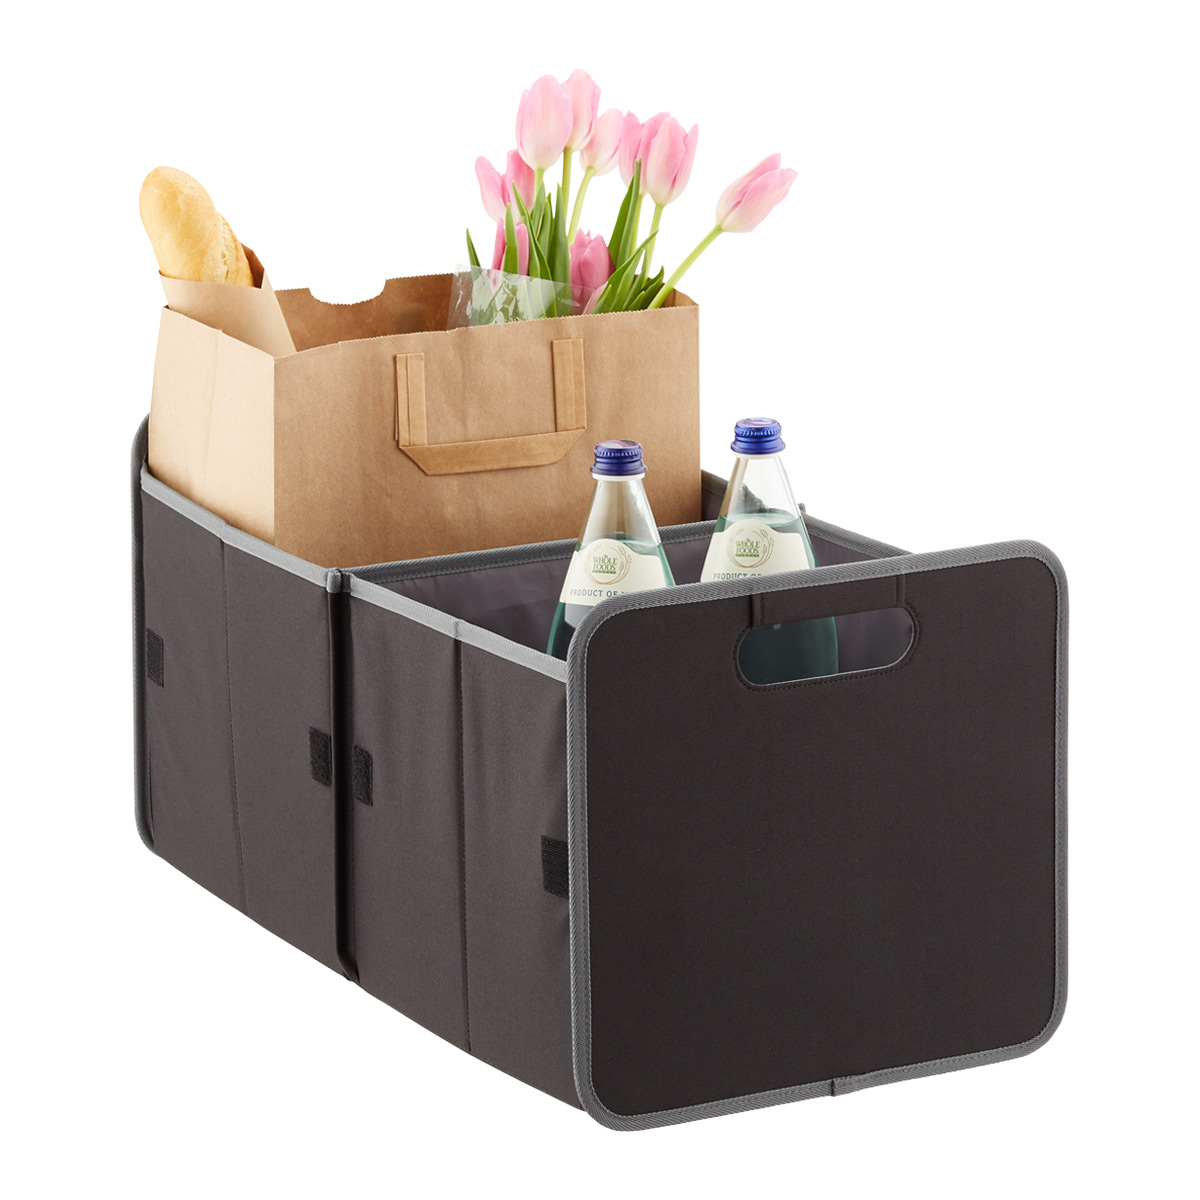 https://www.containerstore.com/catalogimages/506895/10075153-foldable-trunk-box-4.jpg